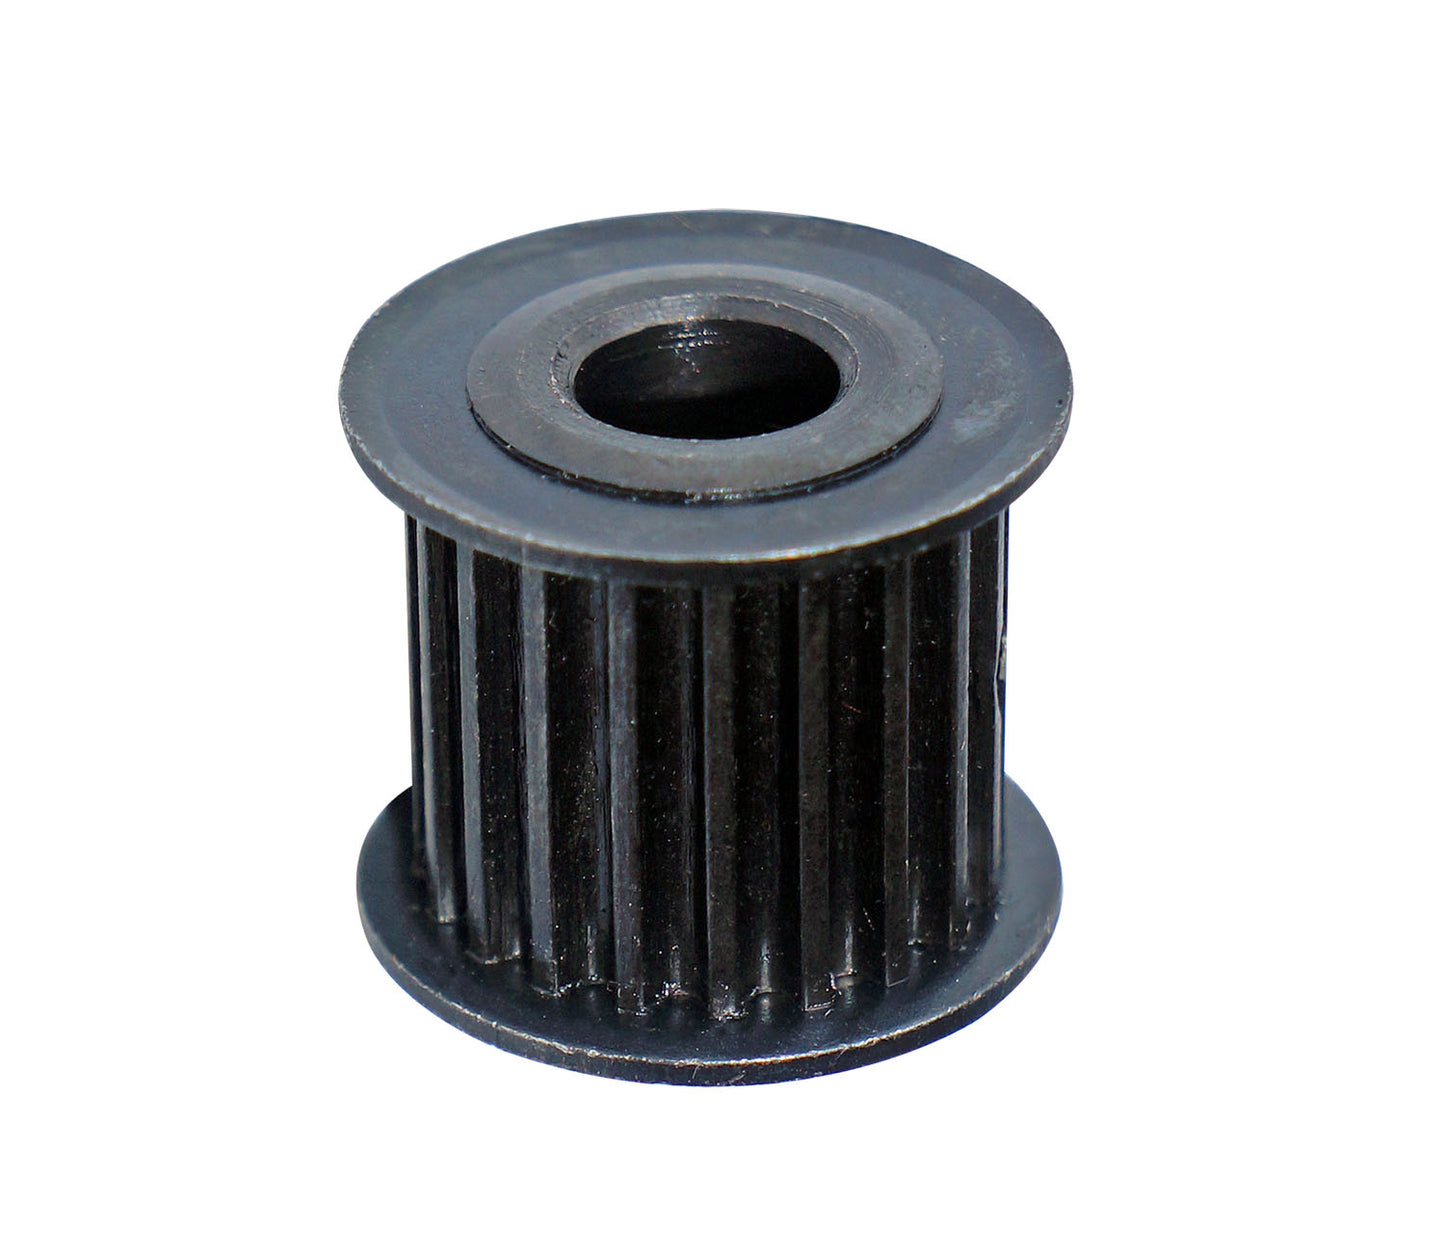 Maytech MTSKG1616 20T 16mm Width M4 Mounting Hole M3 Pitch Motor Pulley for 8mm Brushless Belt-driven Motor